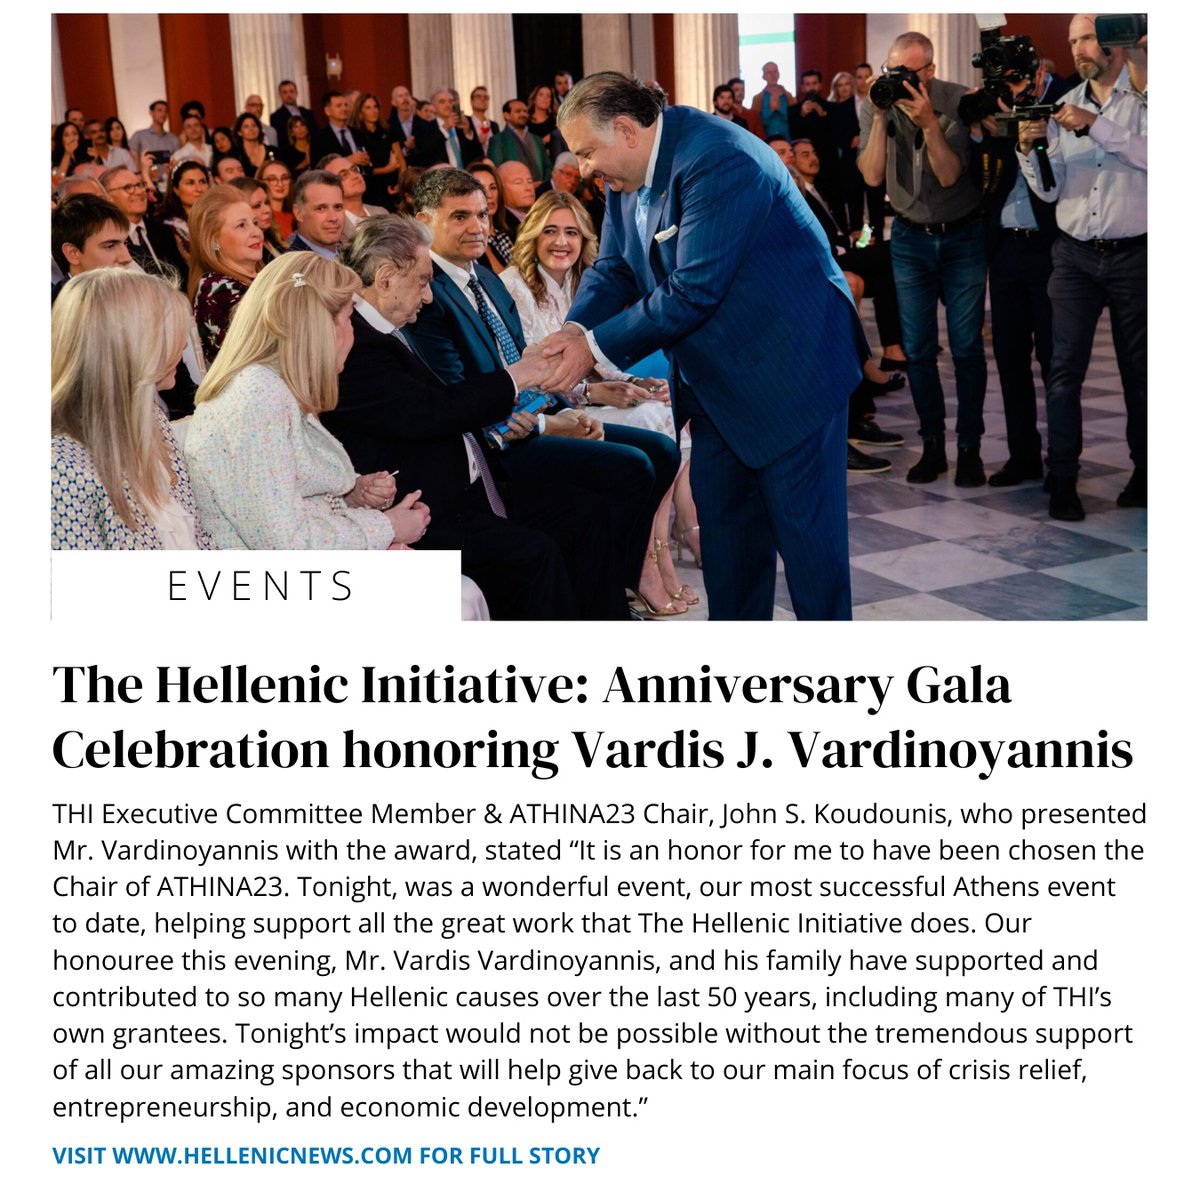 We are thrilled to share an incredible article featuring The Hellenic Initiative Anniversary Gala Celebration, honoring the remarkable Vardis J. Vardinoyannis! #VardisJVardinoyannis #hellenicnewsofamerica #hellenicnews #greeknews #greece #thi #olimaz l8r.it/m4Vk